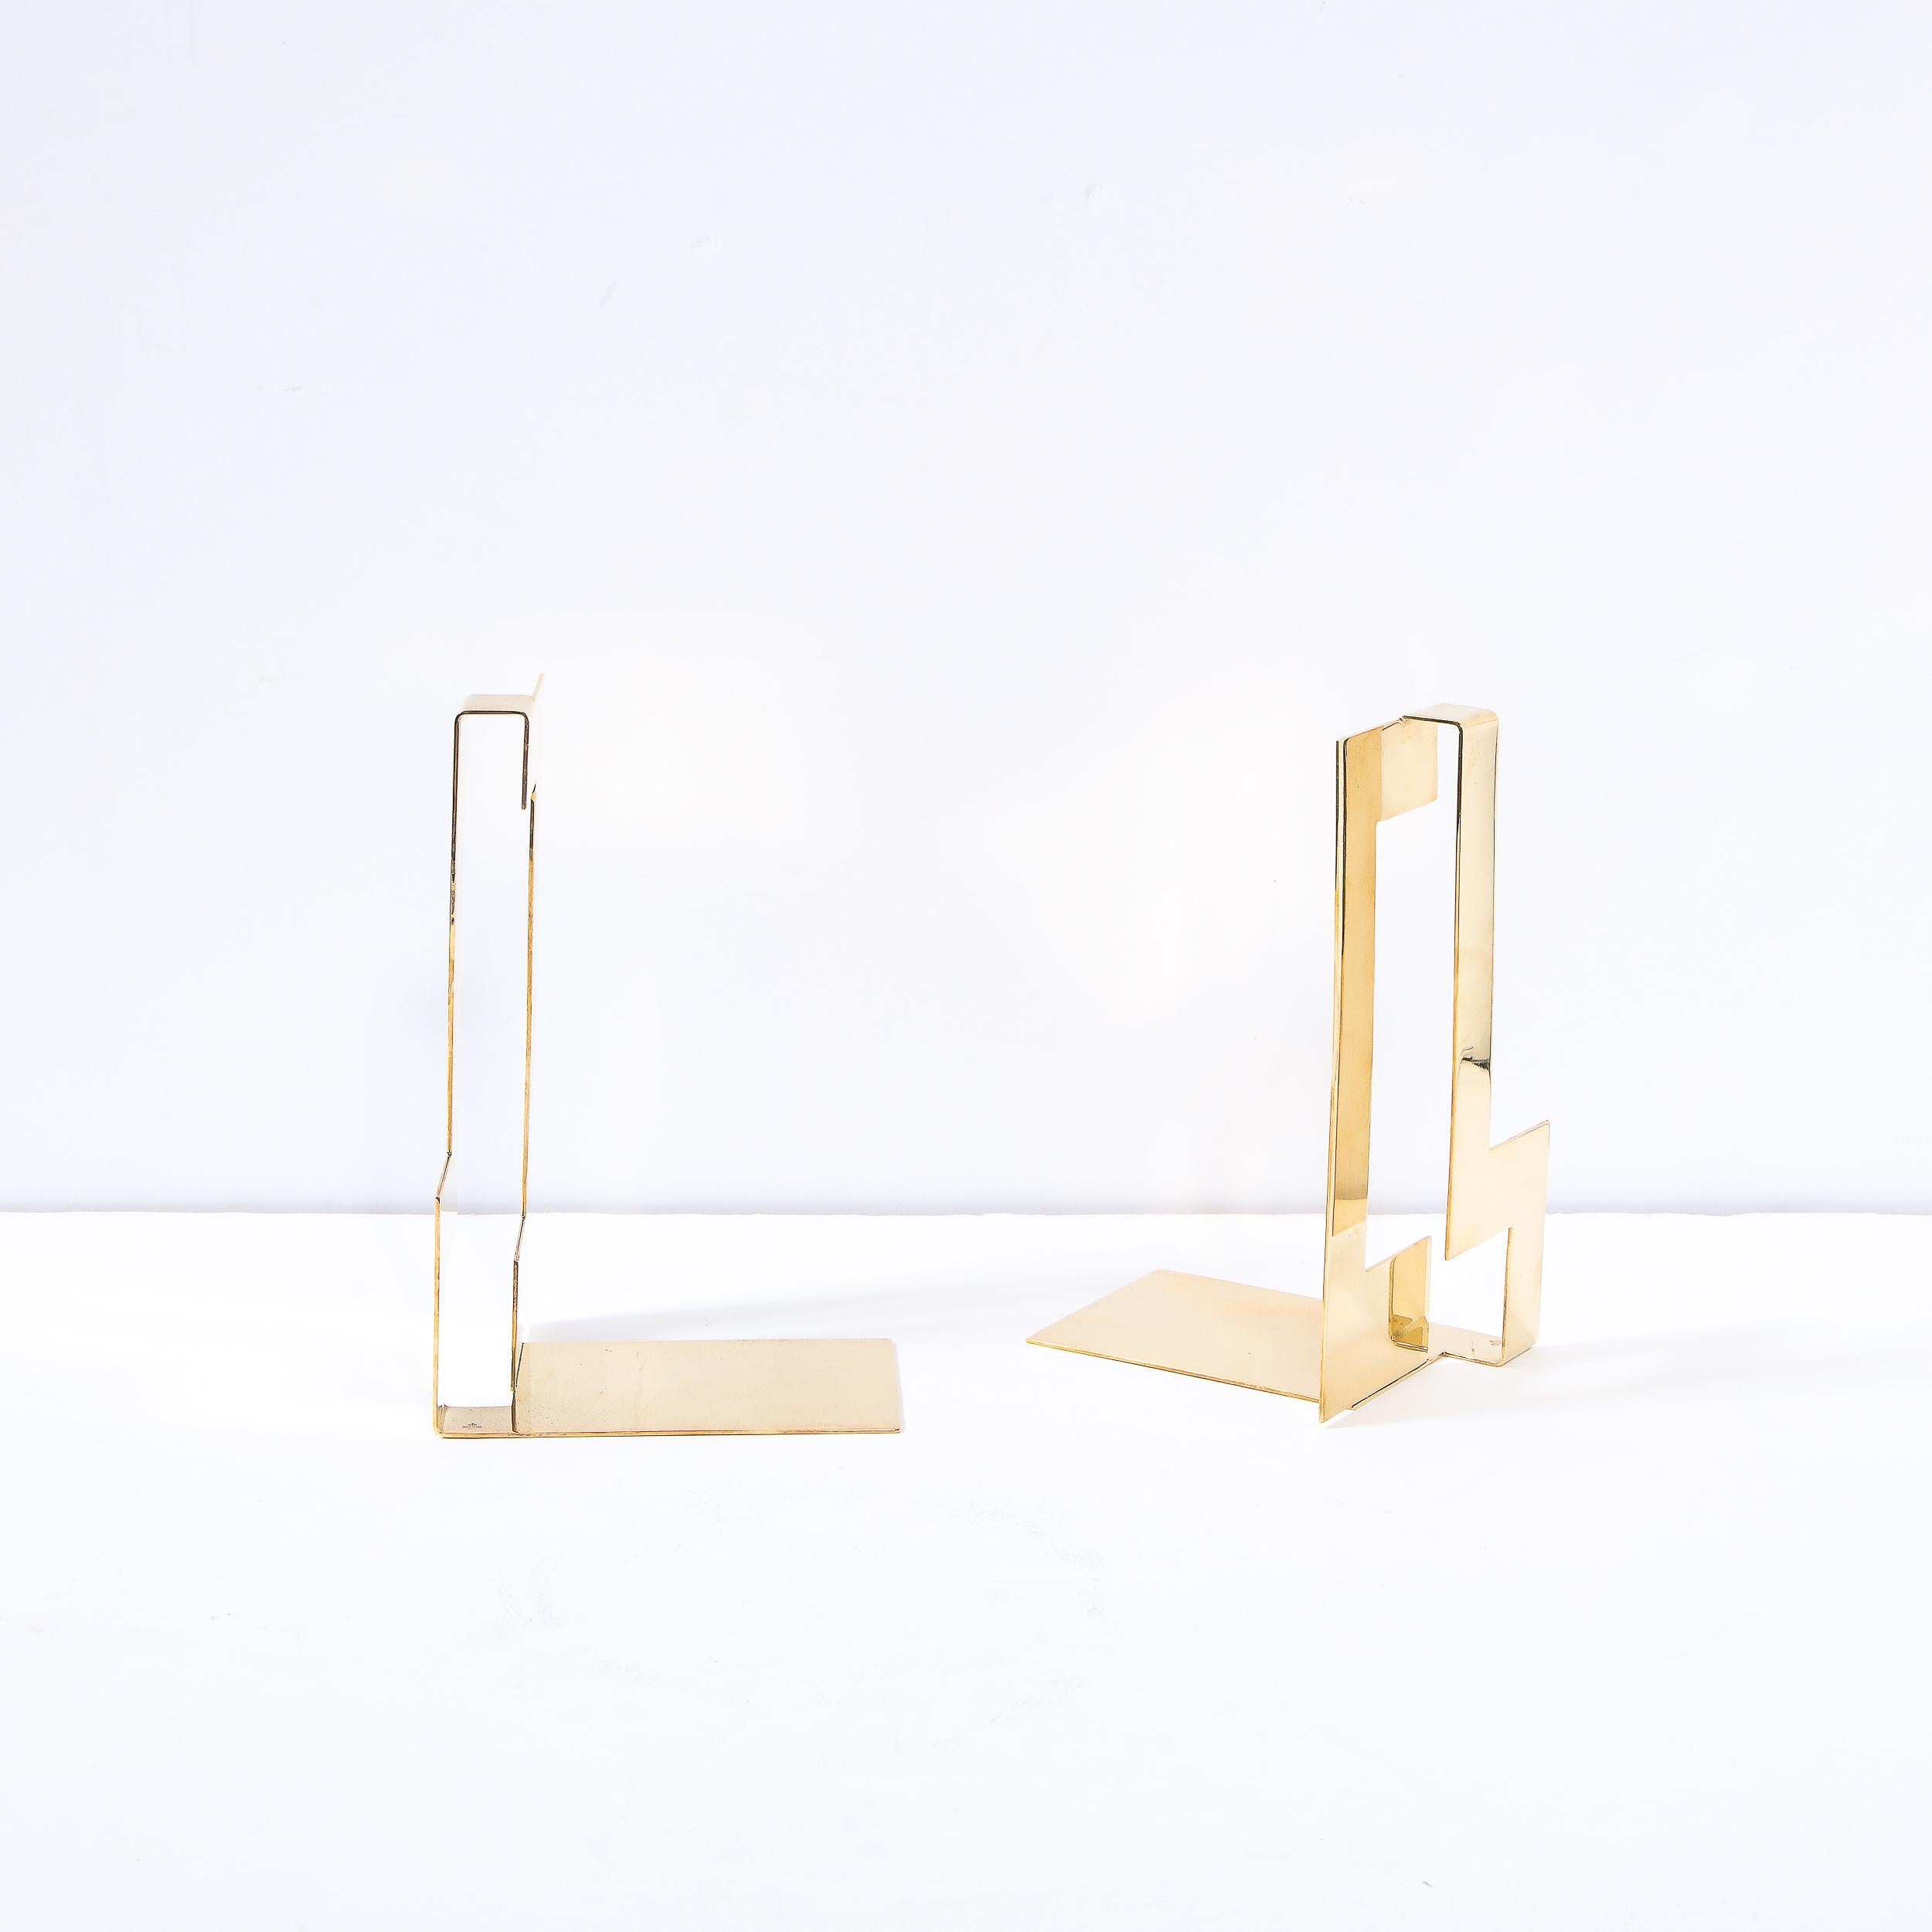 Pair of Scandinavian Modernist Polished Brass Rectilinear Bookends by Skultana For Sale 2